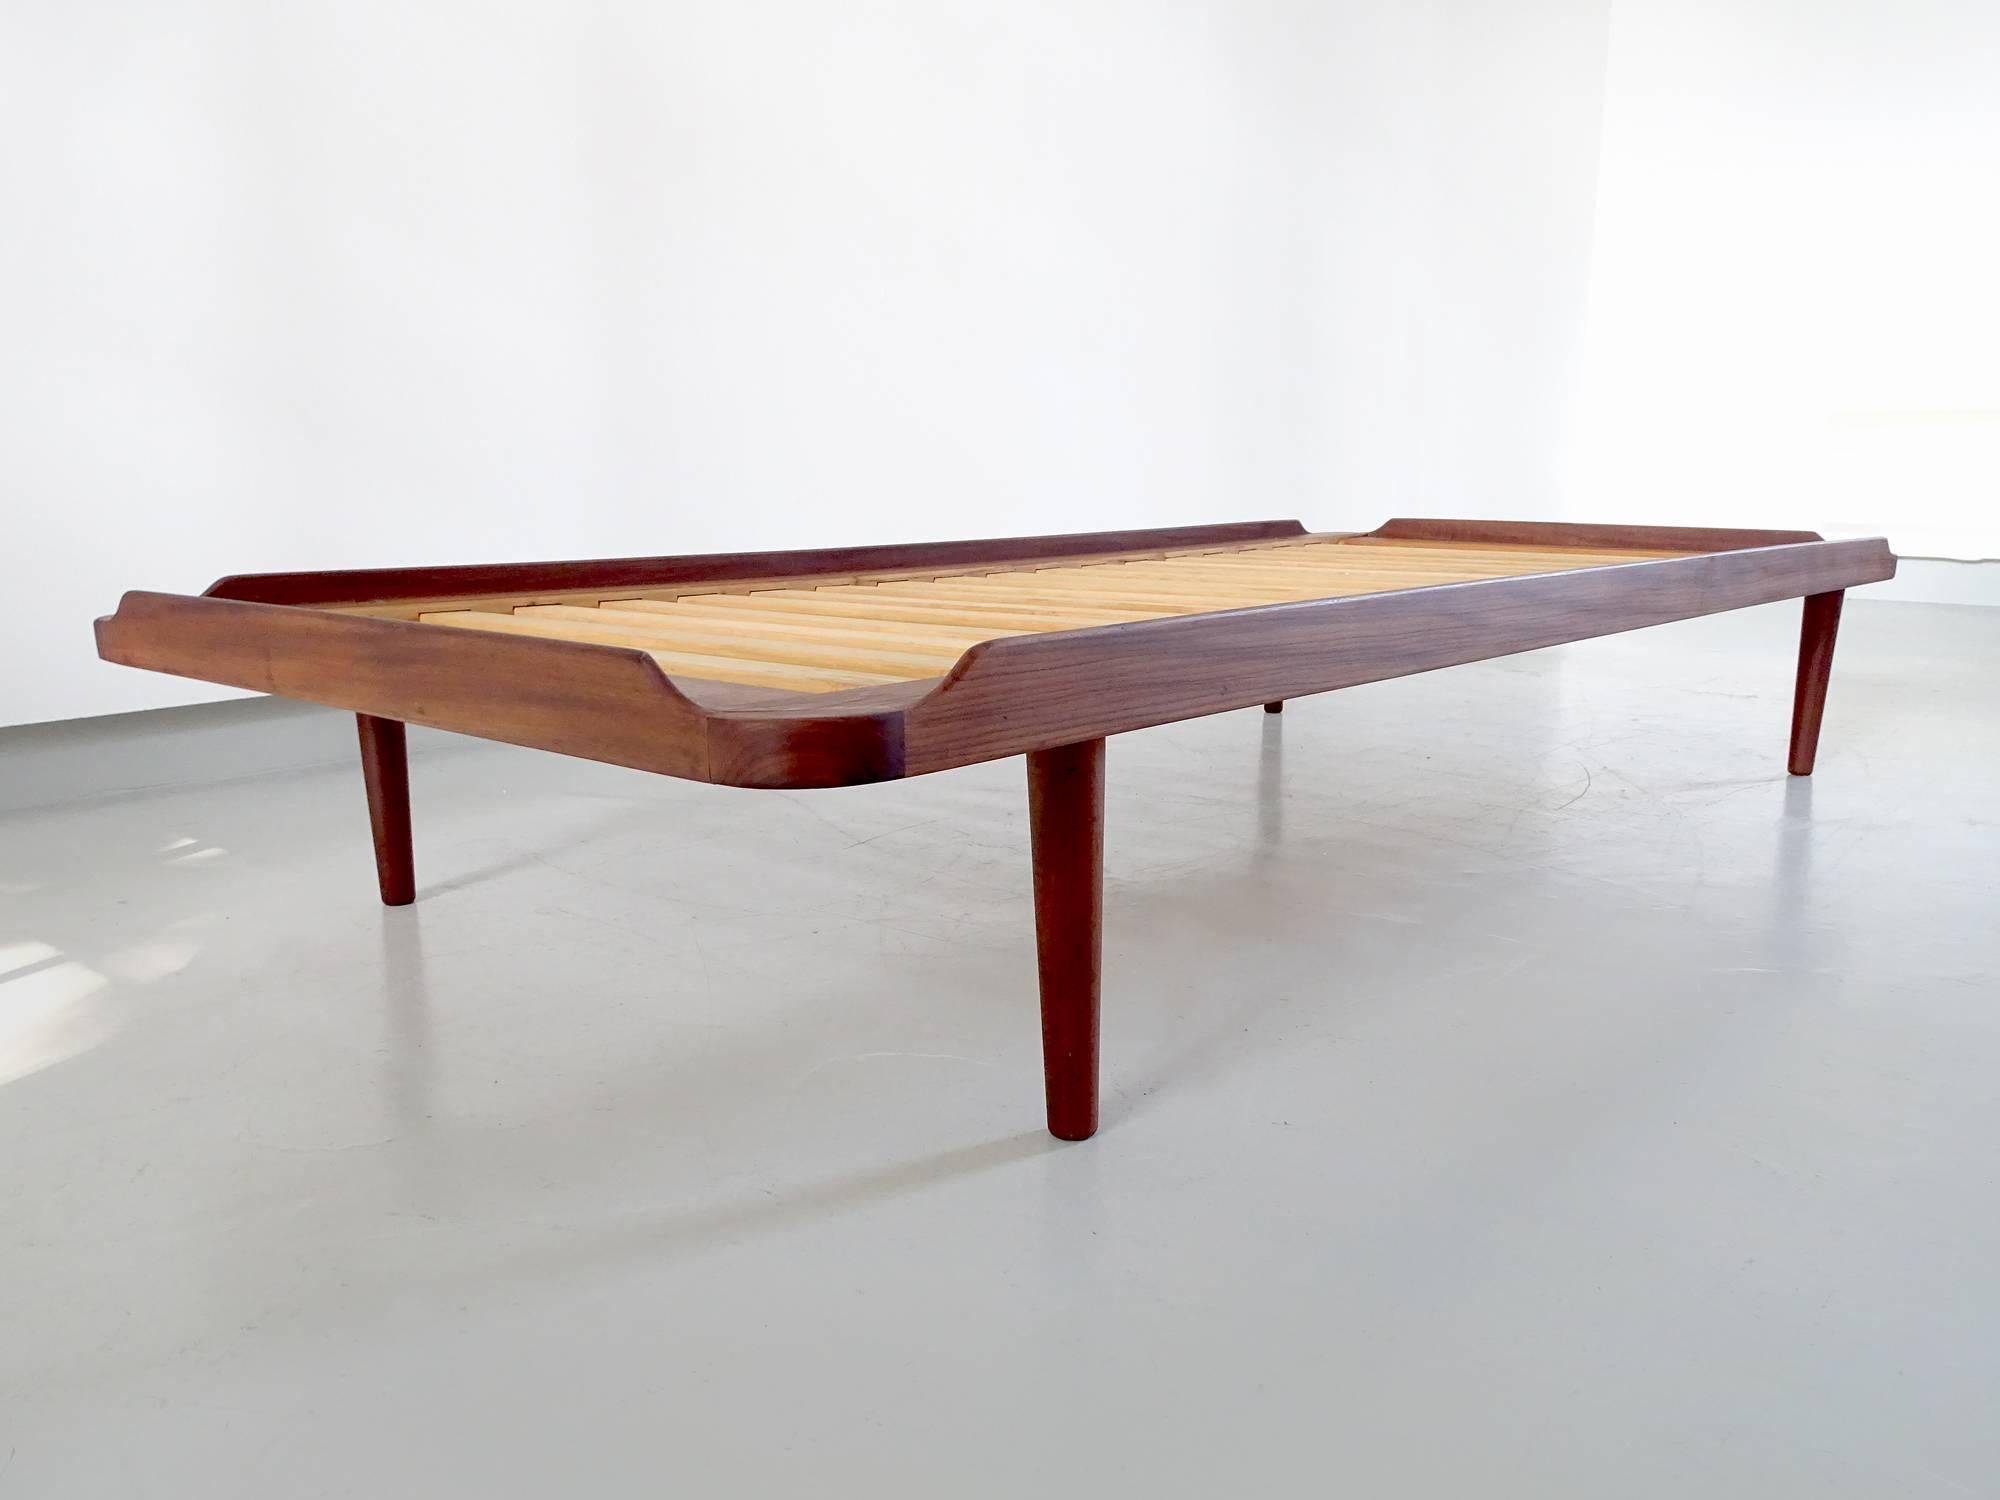 Grete Jalk Daybed in Teak and Cognac Leather for P. Jeppesen, Denmark, 1960 For Sale 6